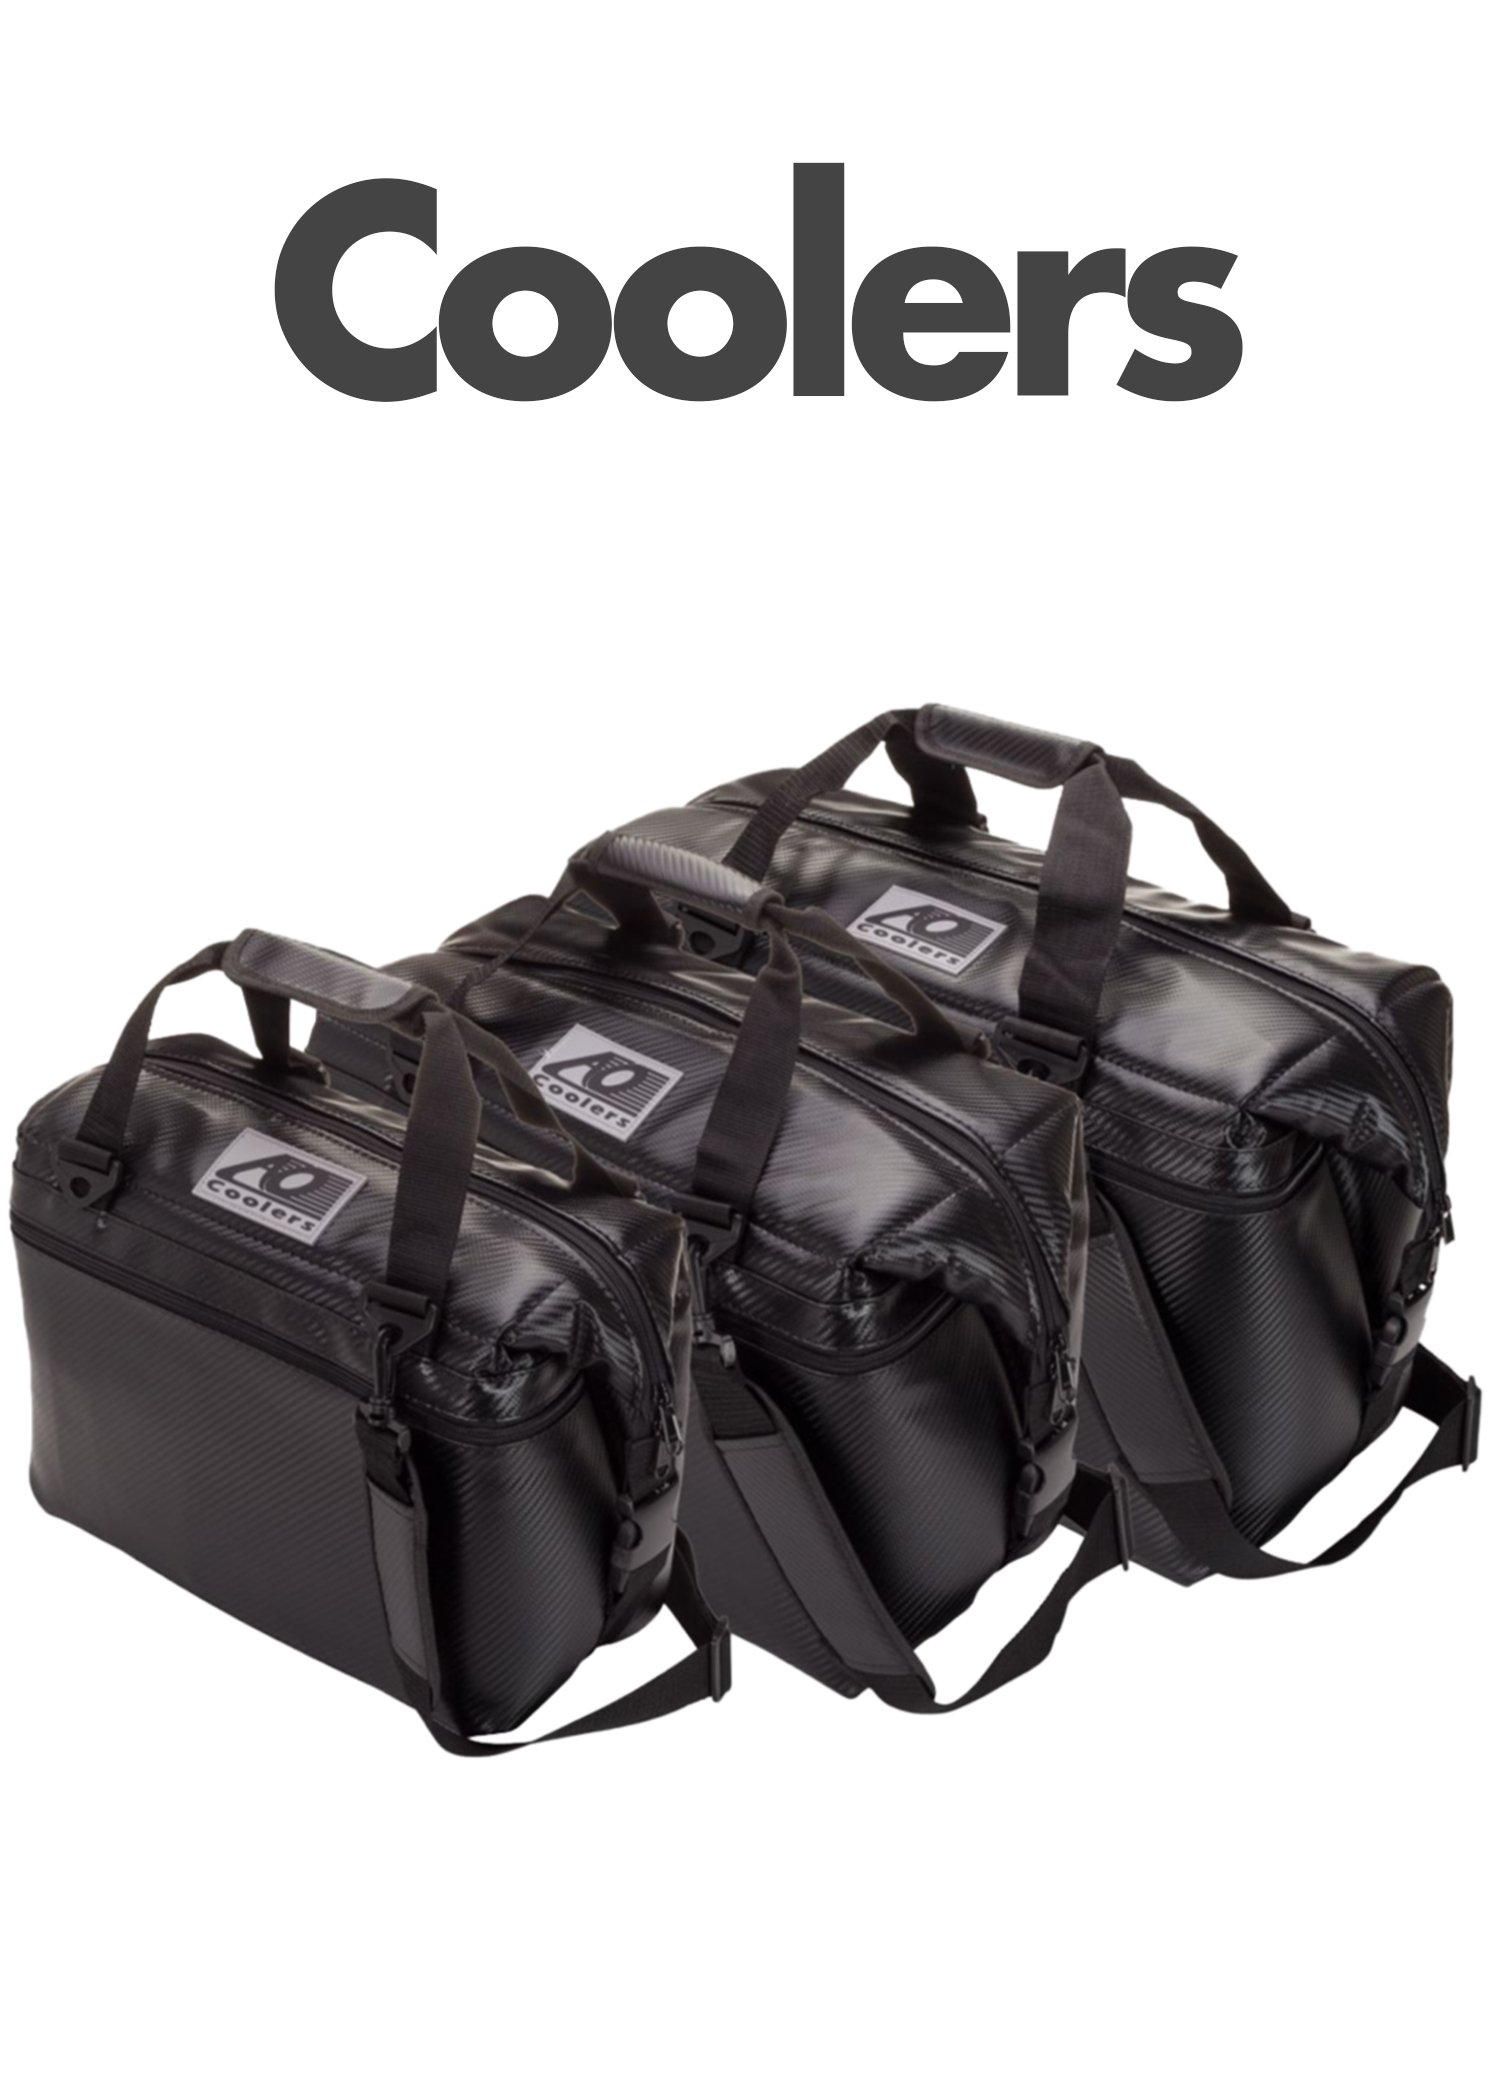 Made in USA Hatch Coolers Canvas Soft Cooler with High-Density Insulation 12-Can Charcoal